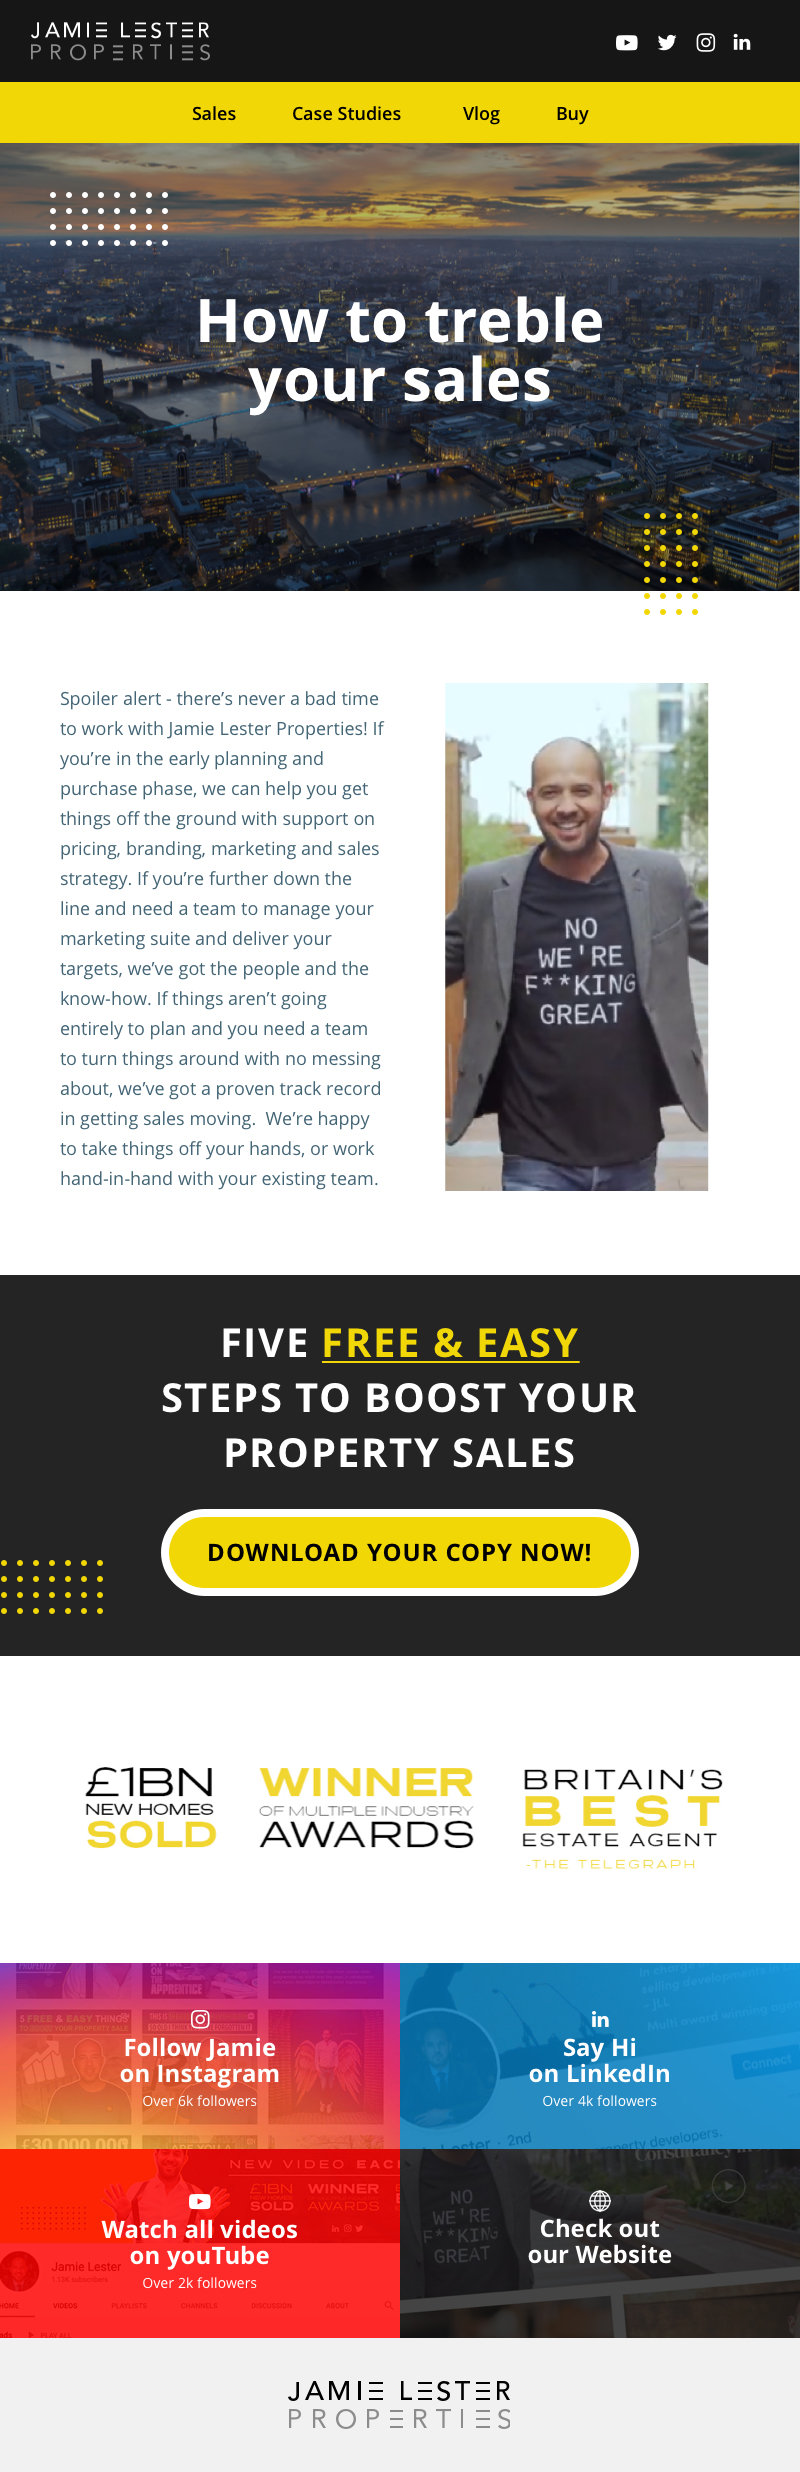 5 free steps to sell your property